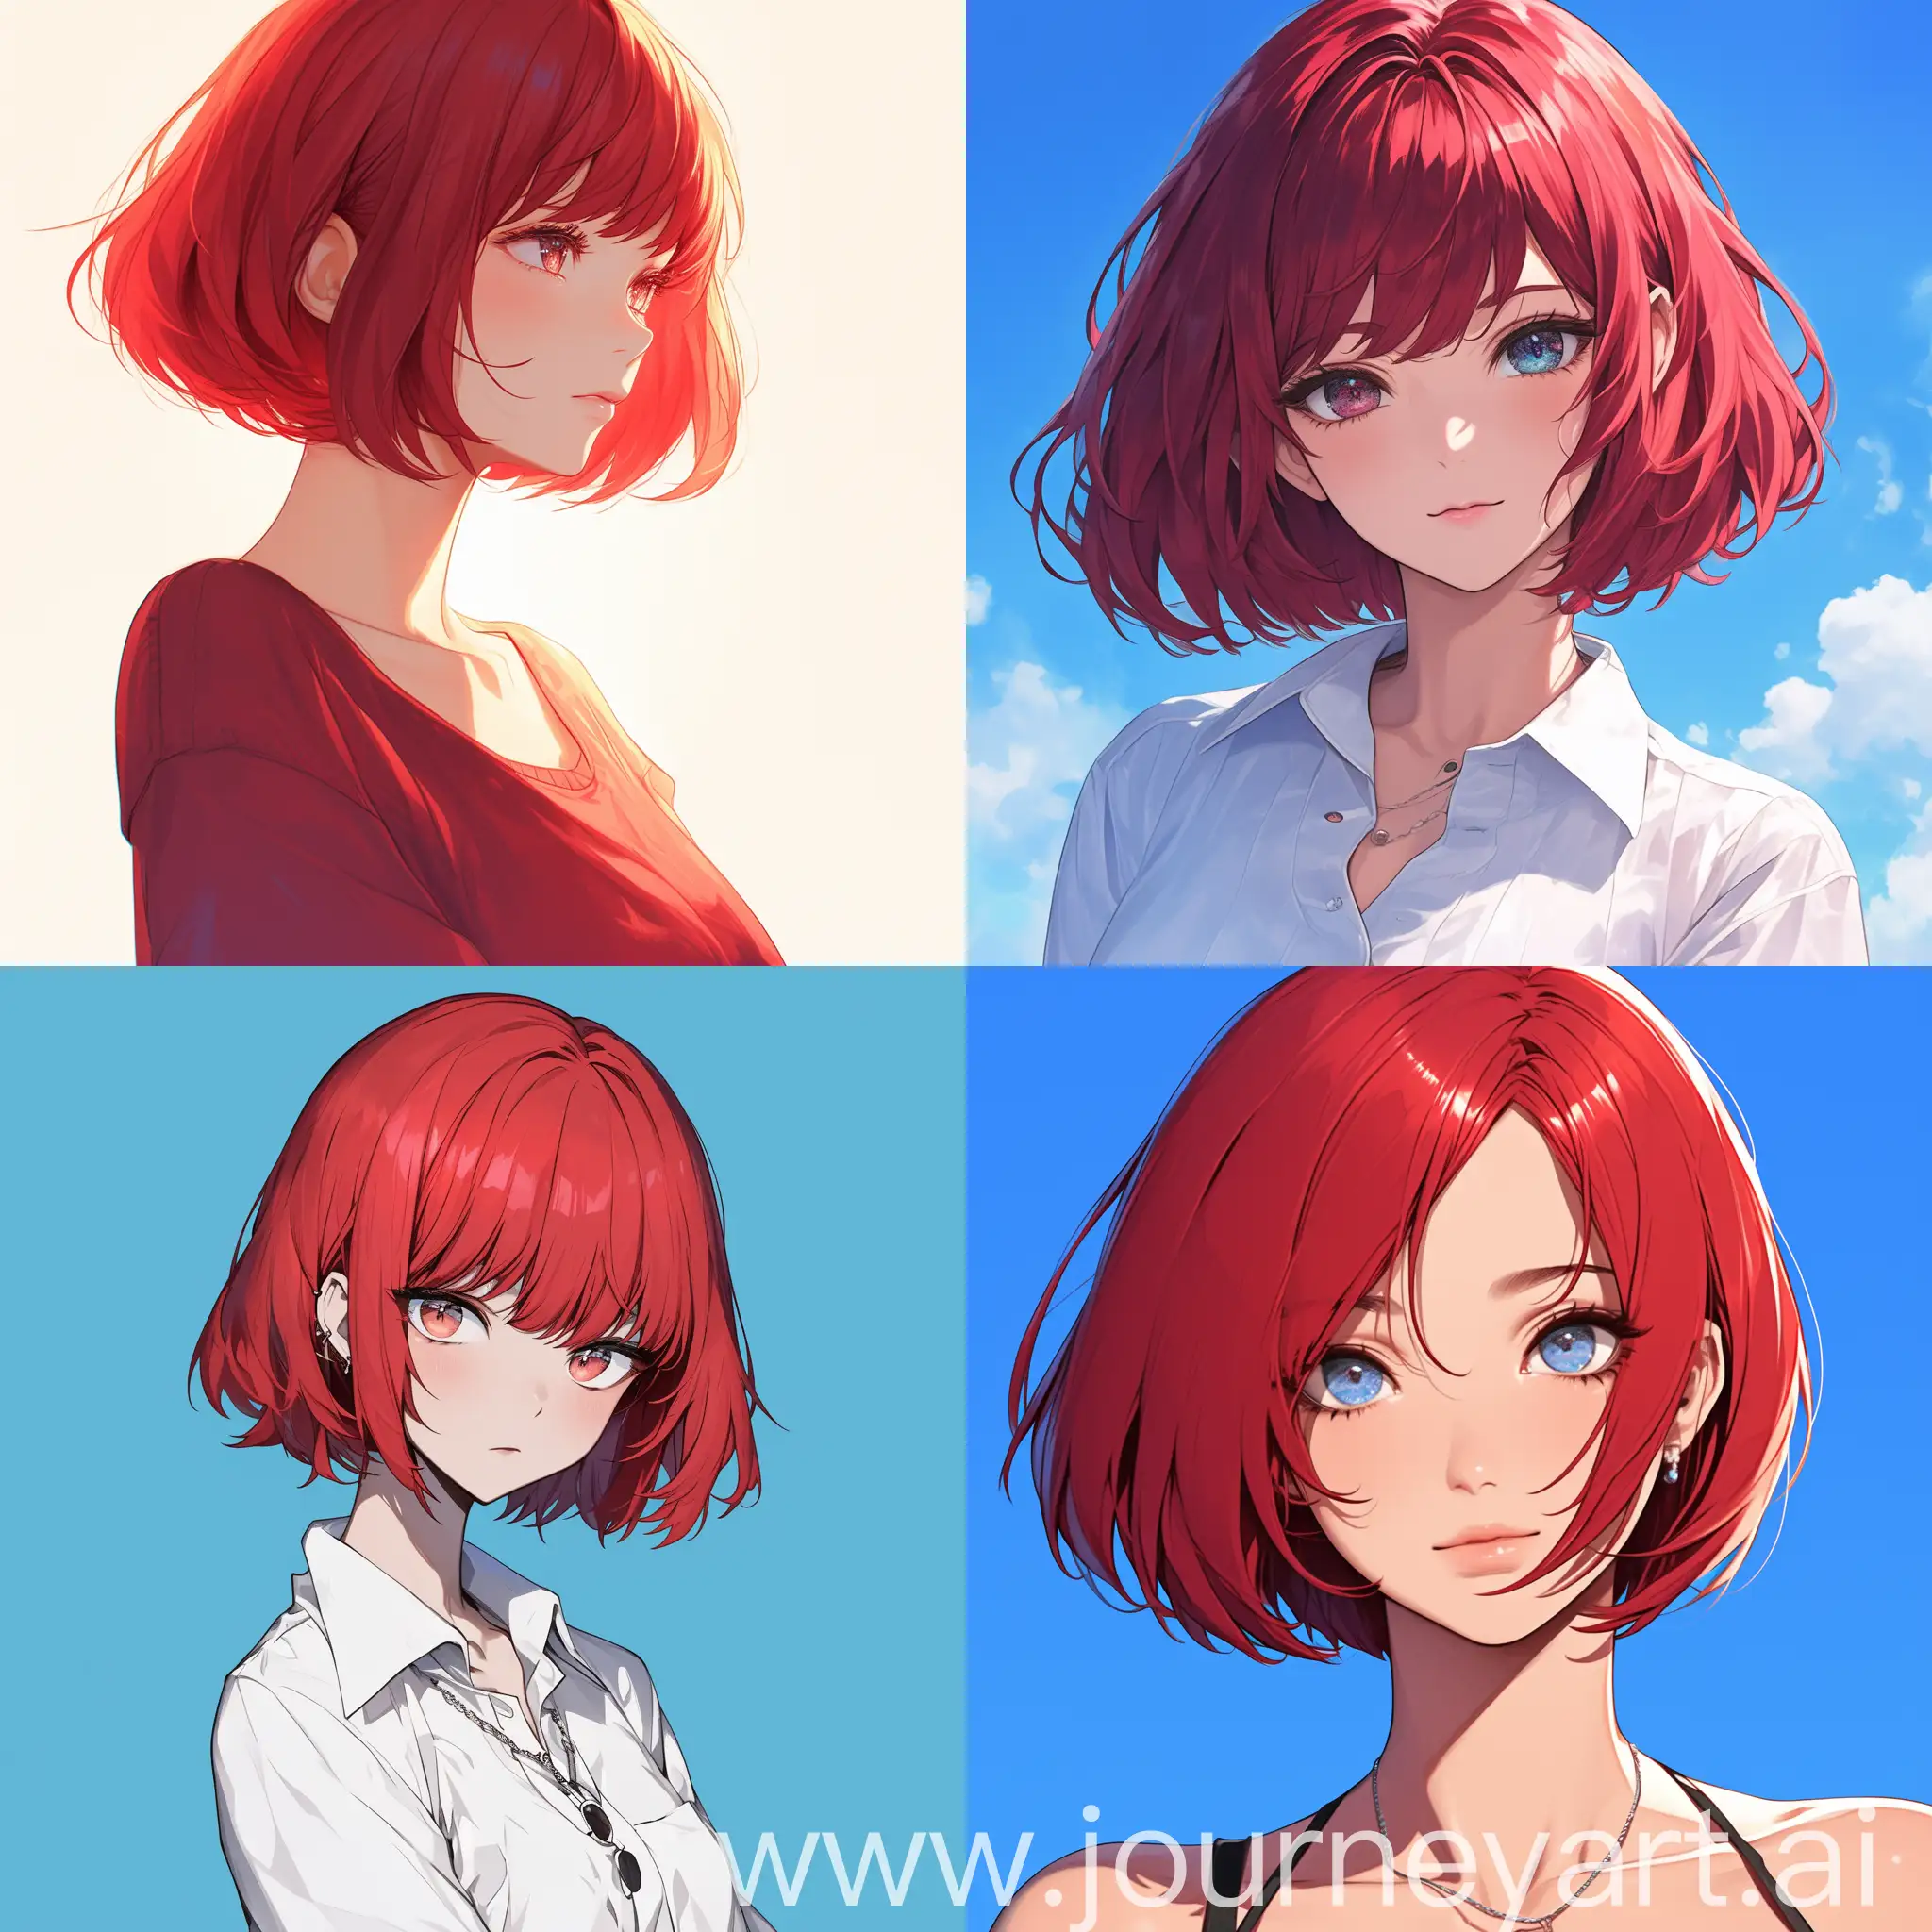 Anime-Girl-with-Short-Red-Hair